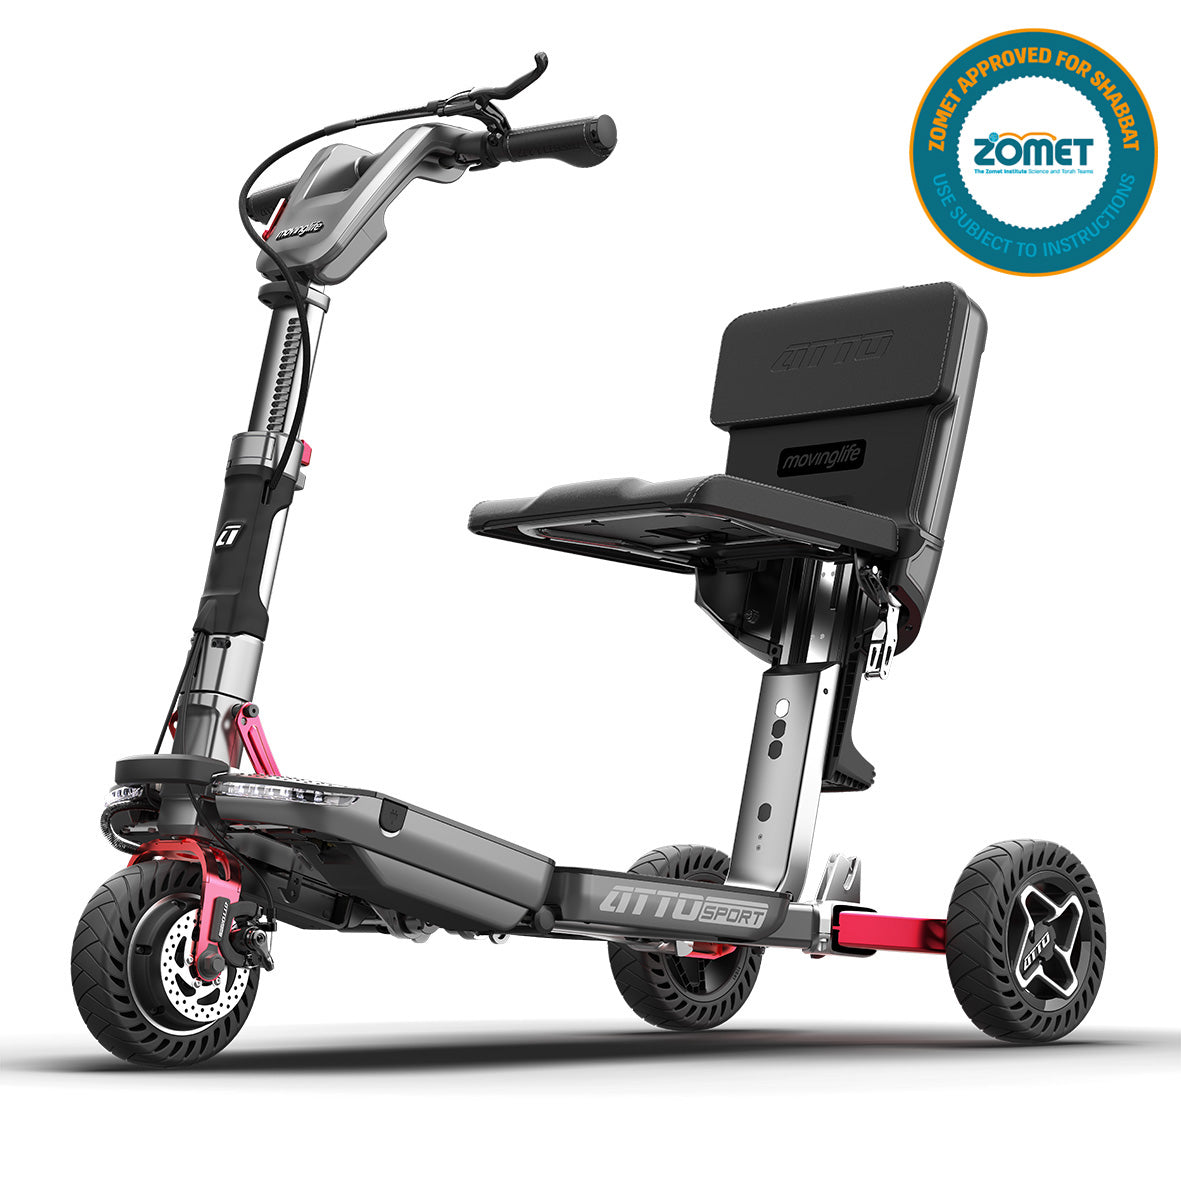 advanced foldable mobility scooter approved for Shabbat use 